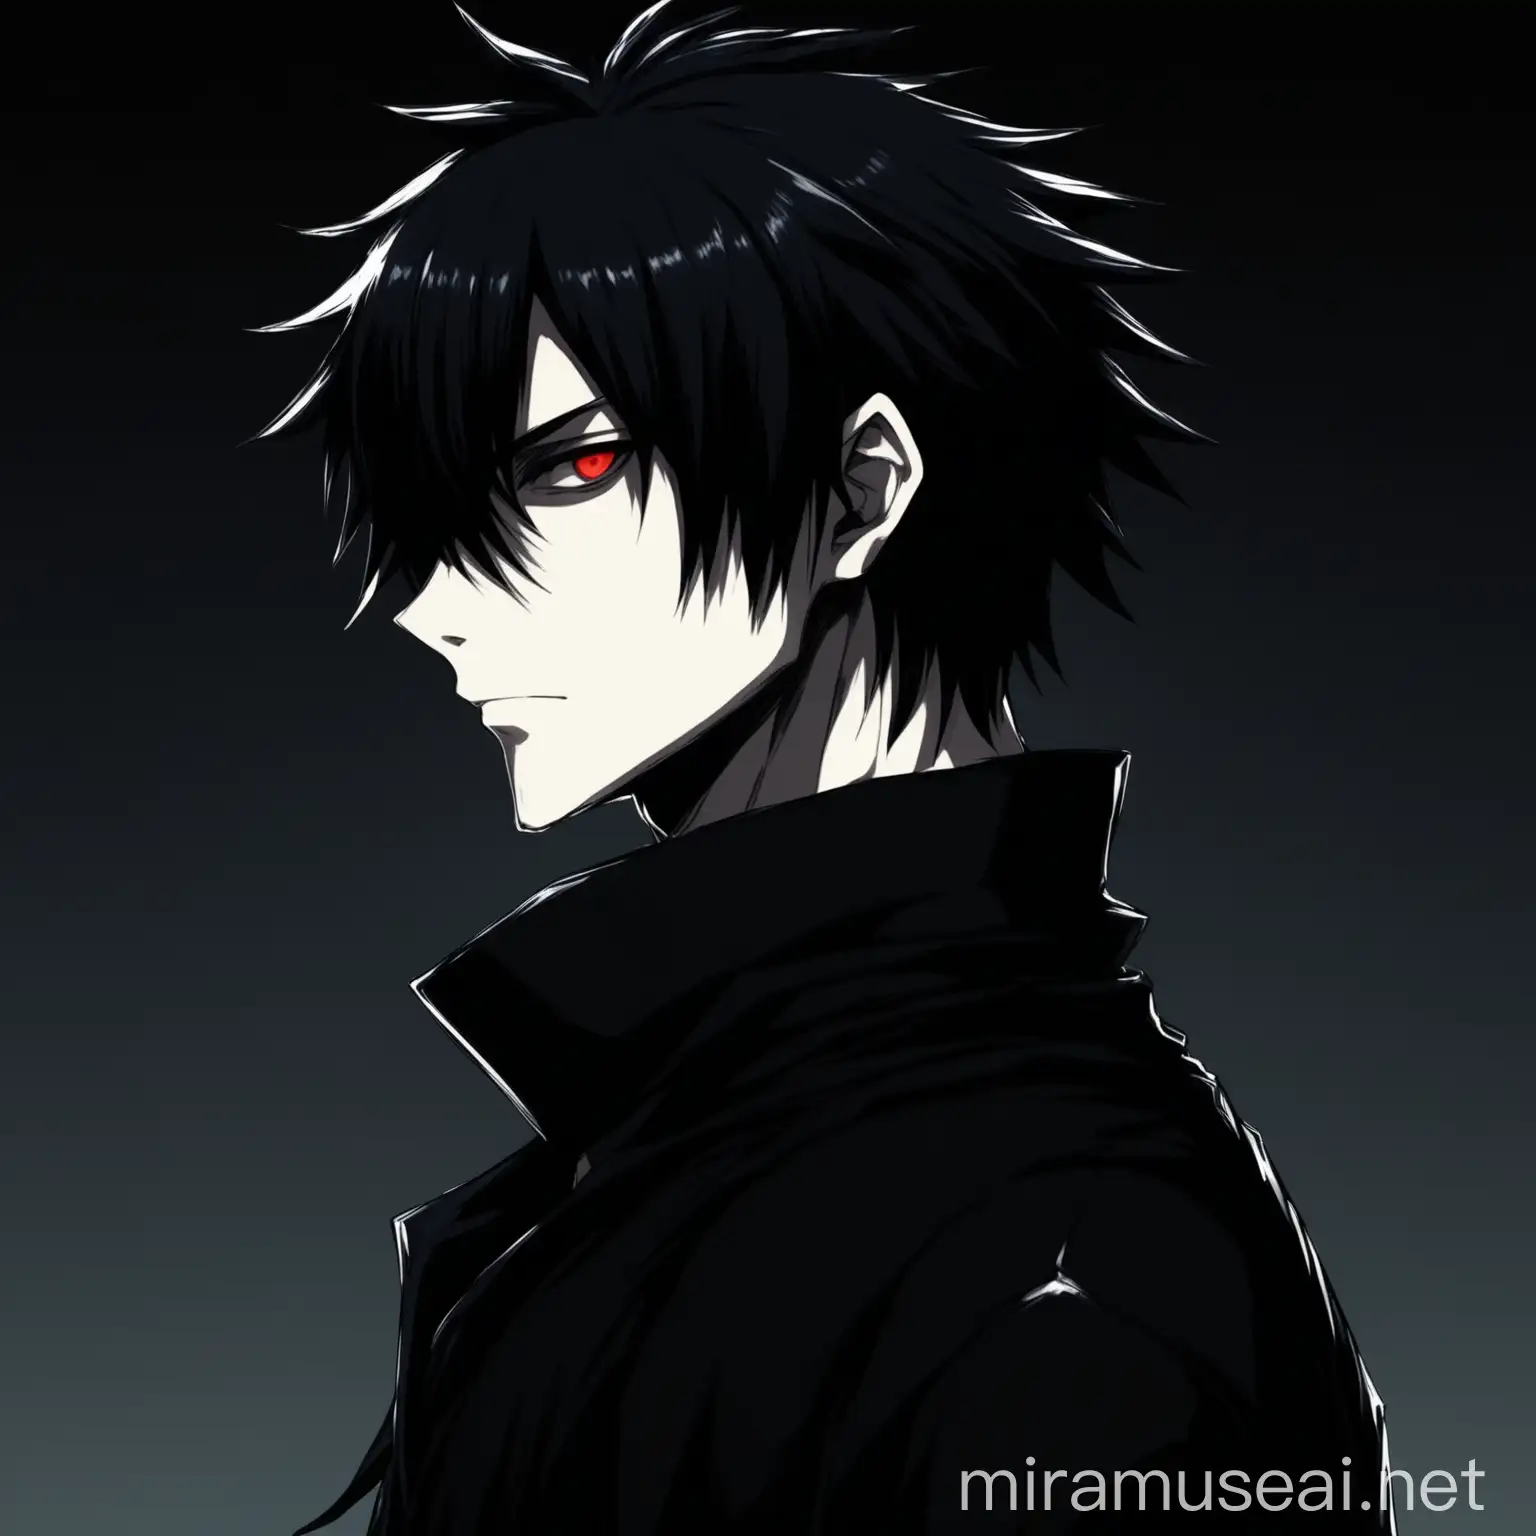 Cool but dark anime guy profile picture.